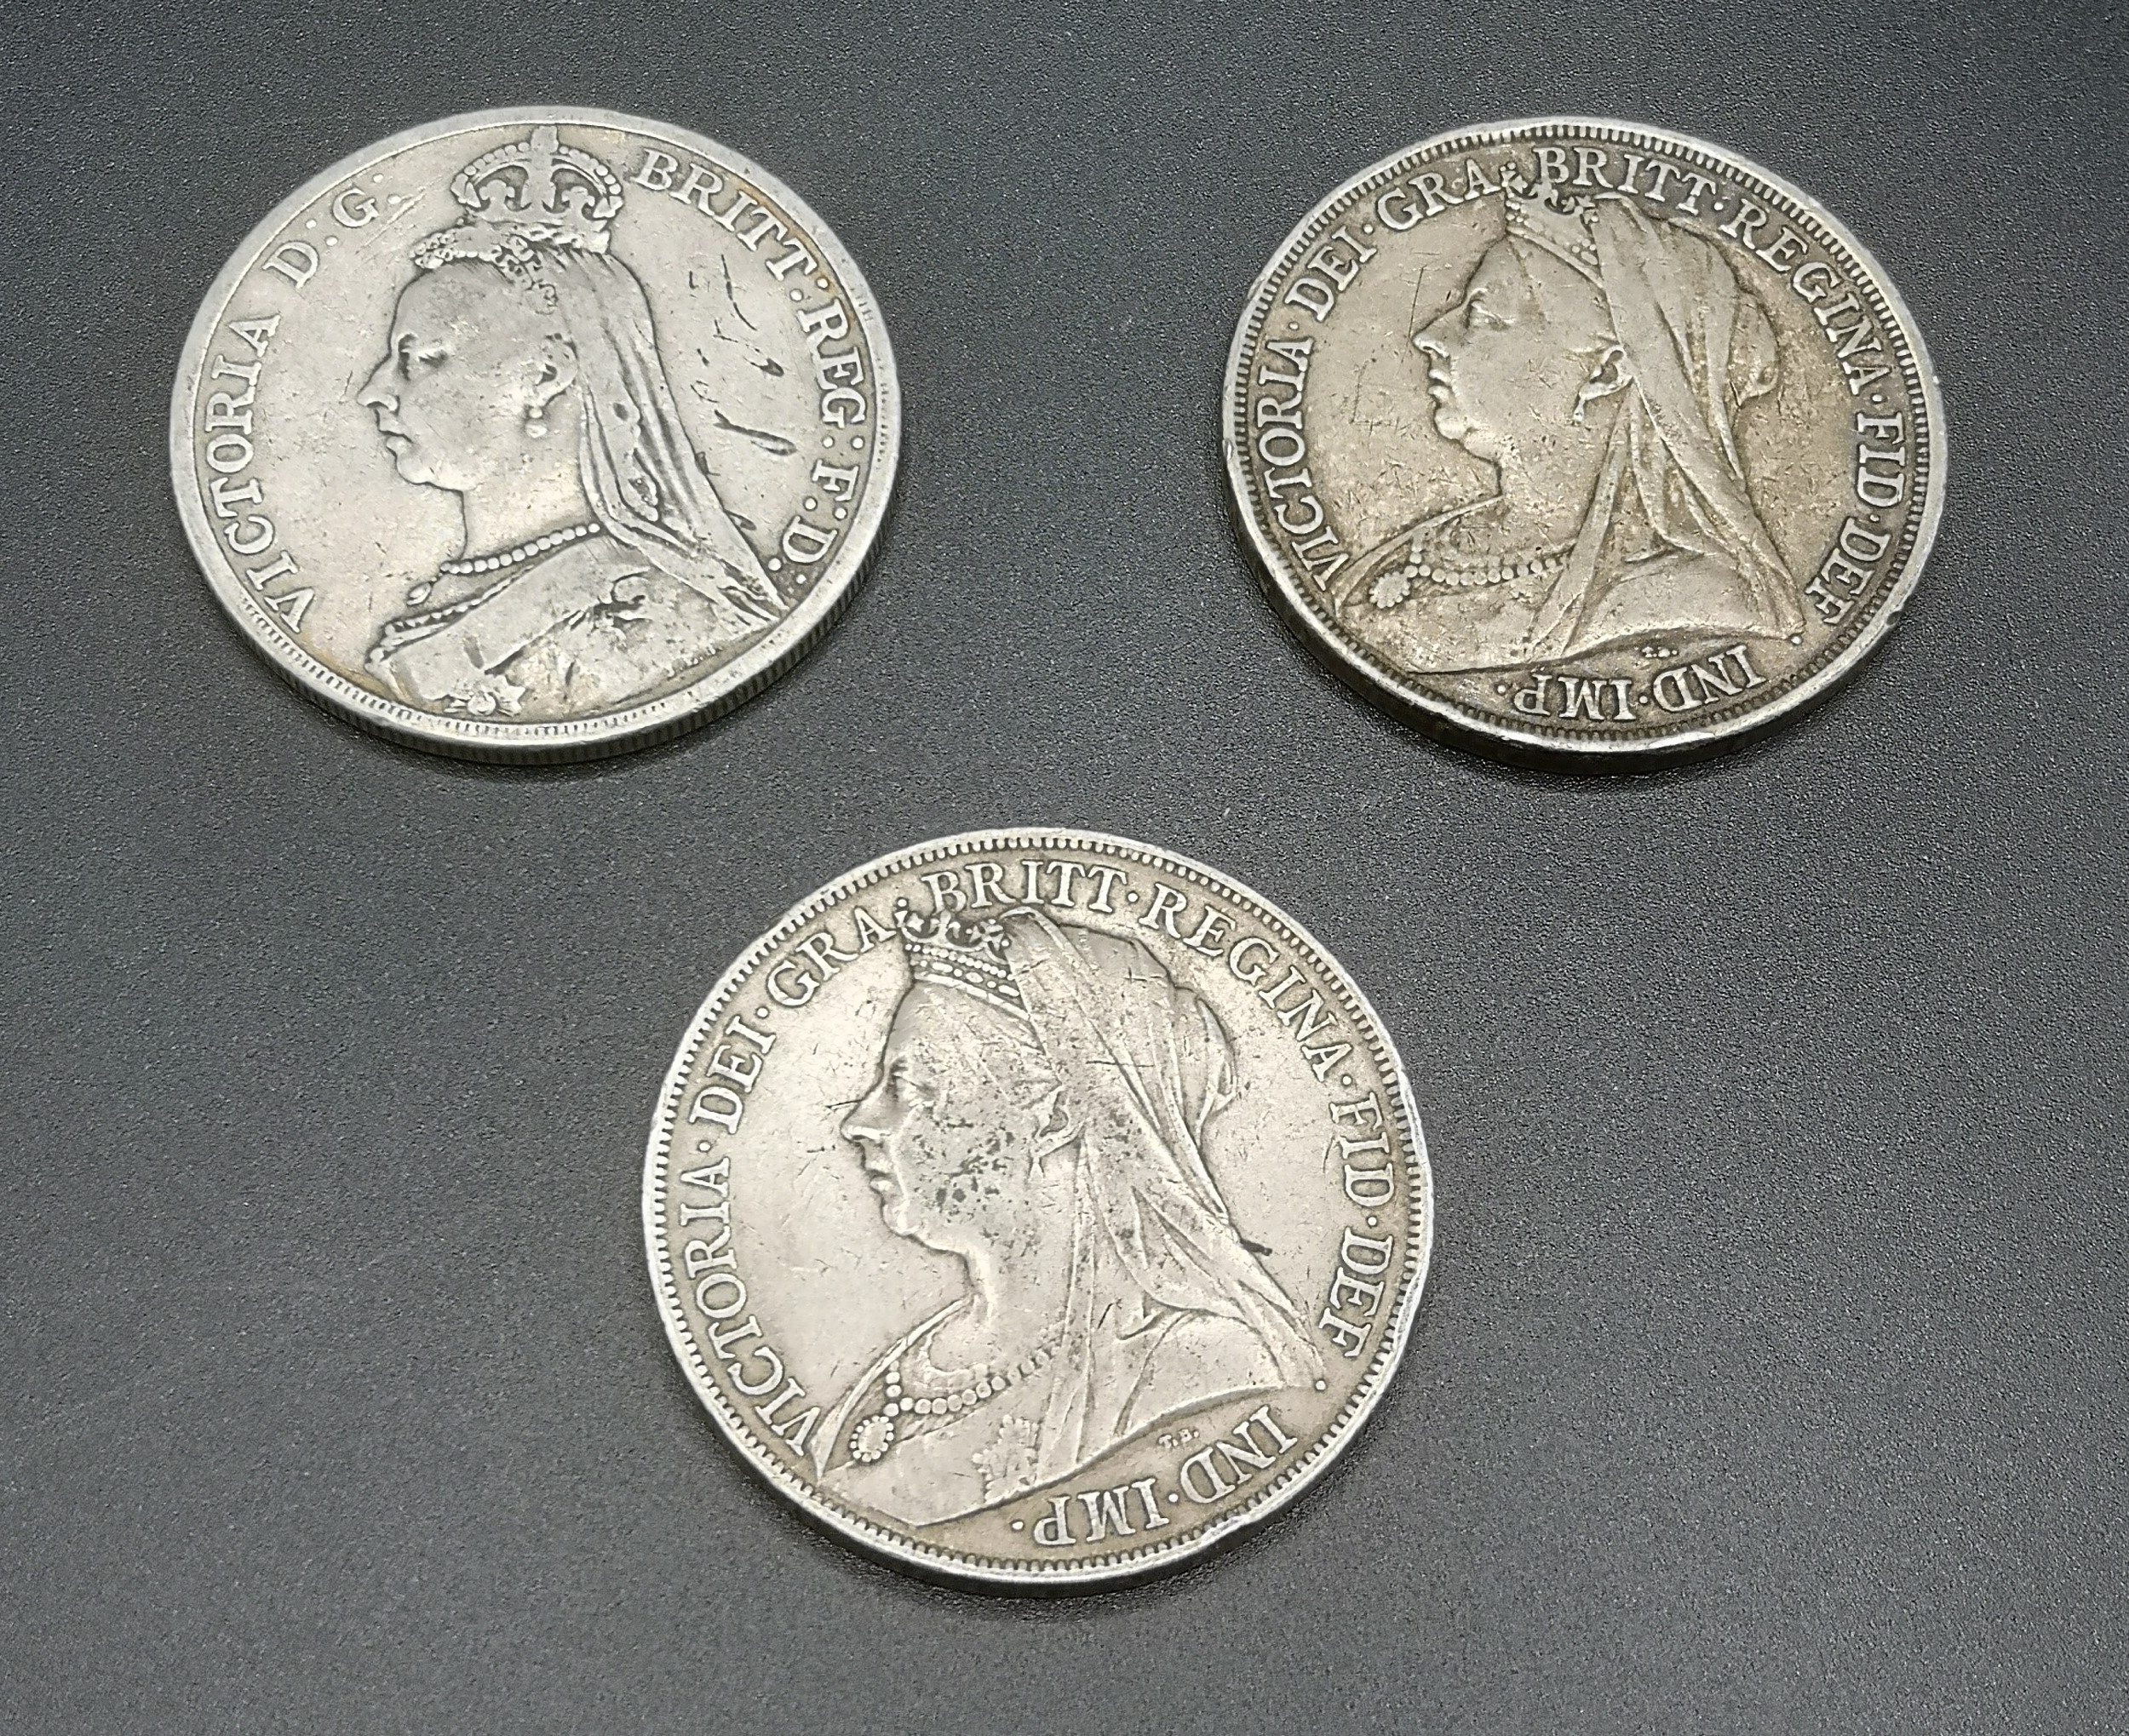 Three Queen Victoria crown coins: 1889, 1893, and 1900 - Image 2 of 10